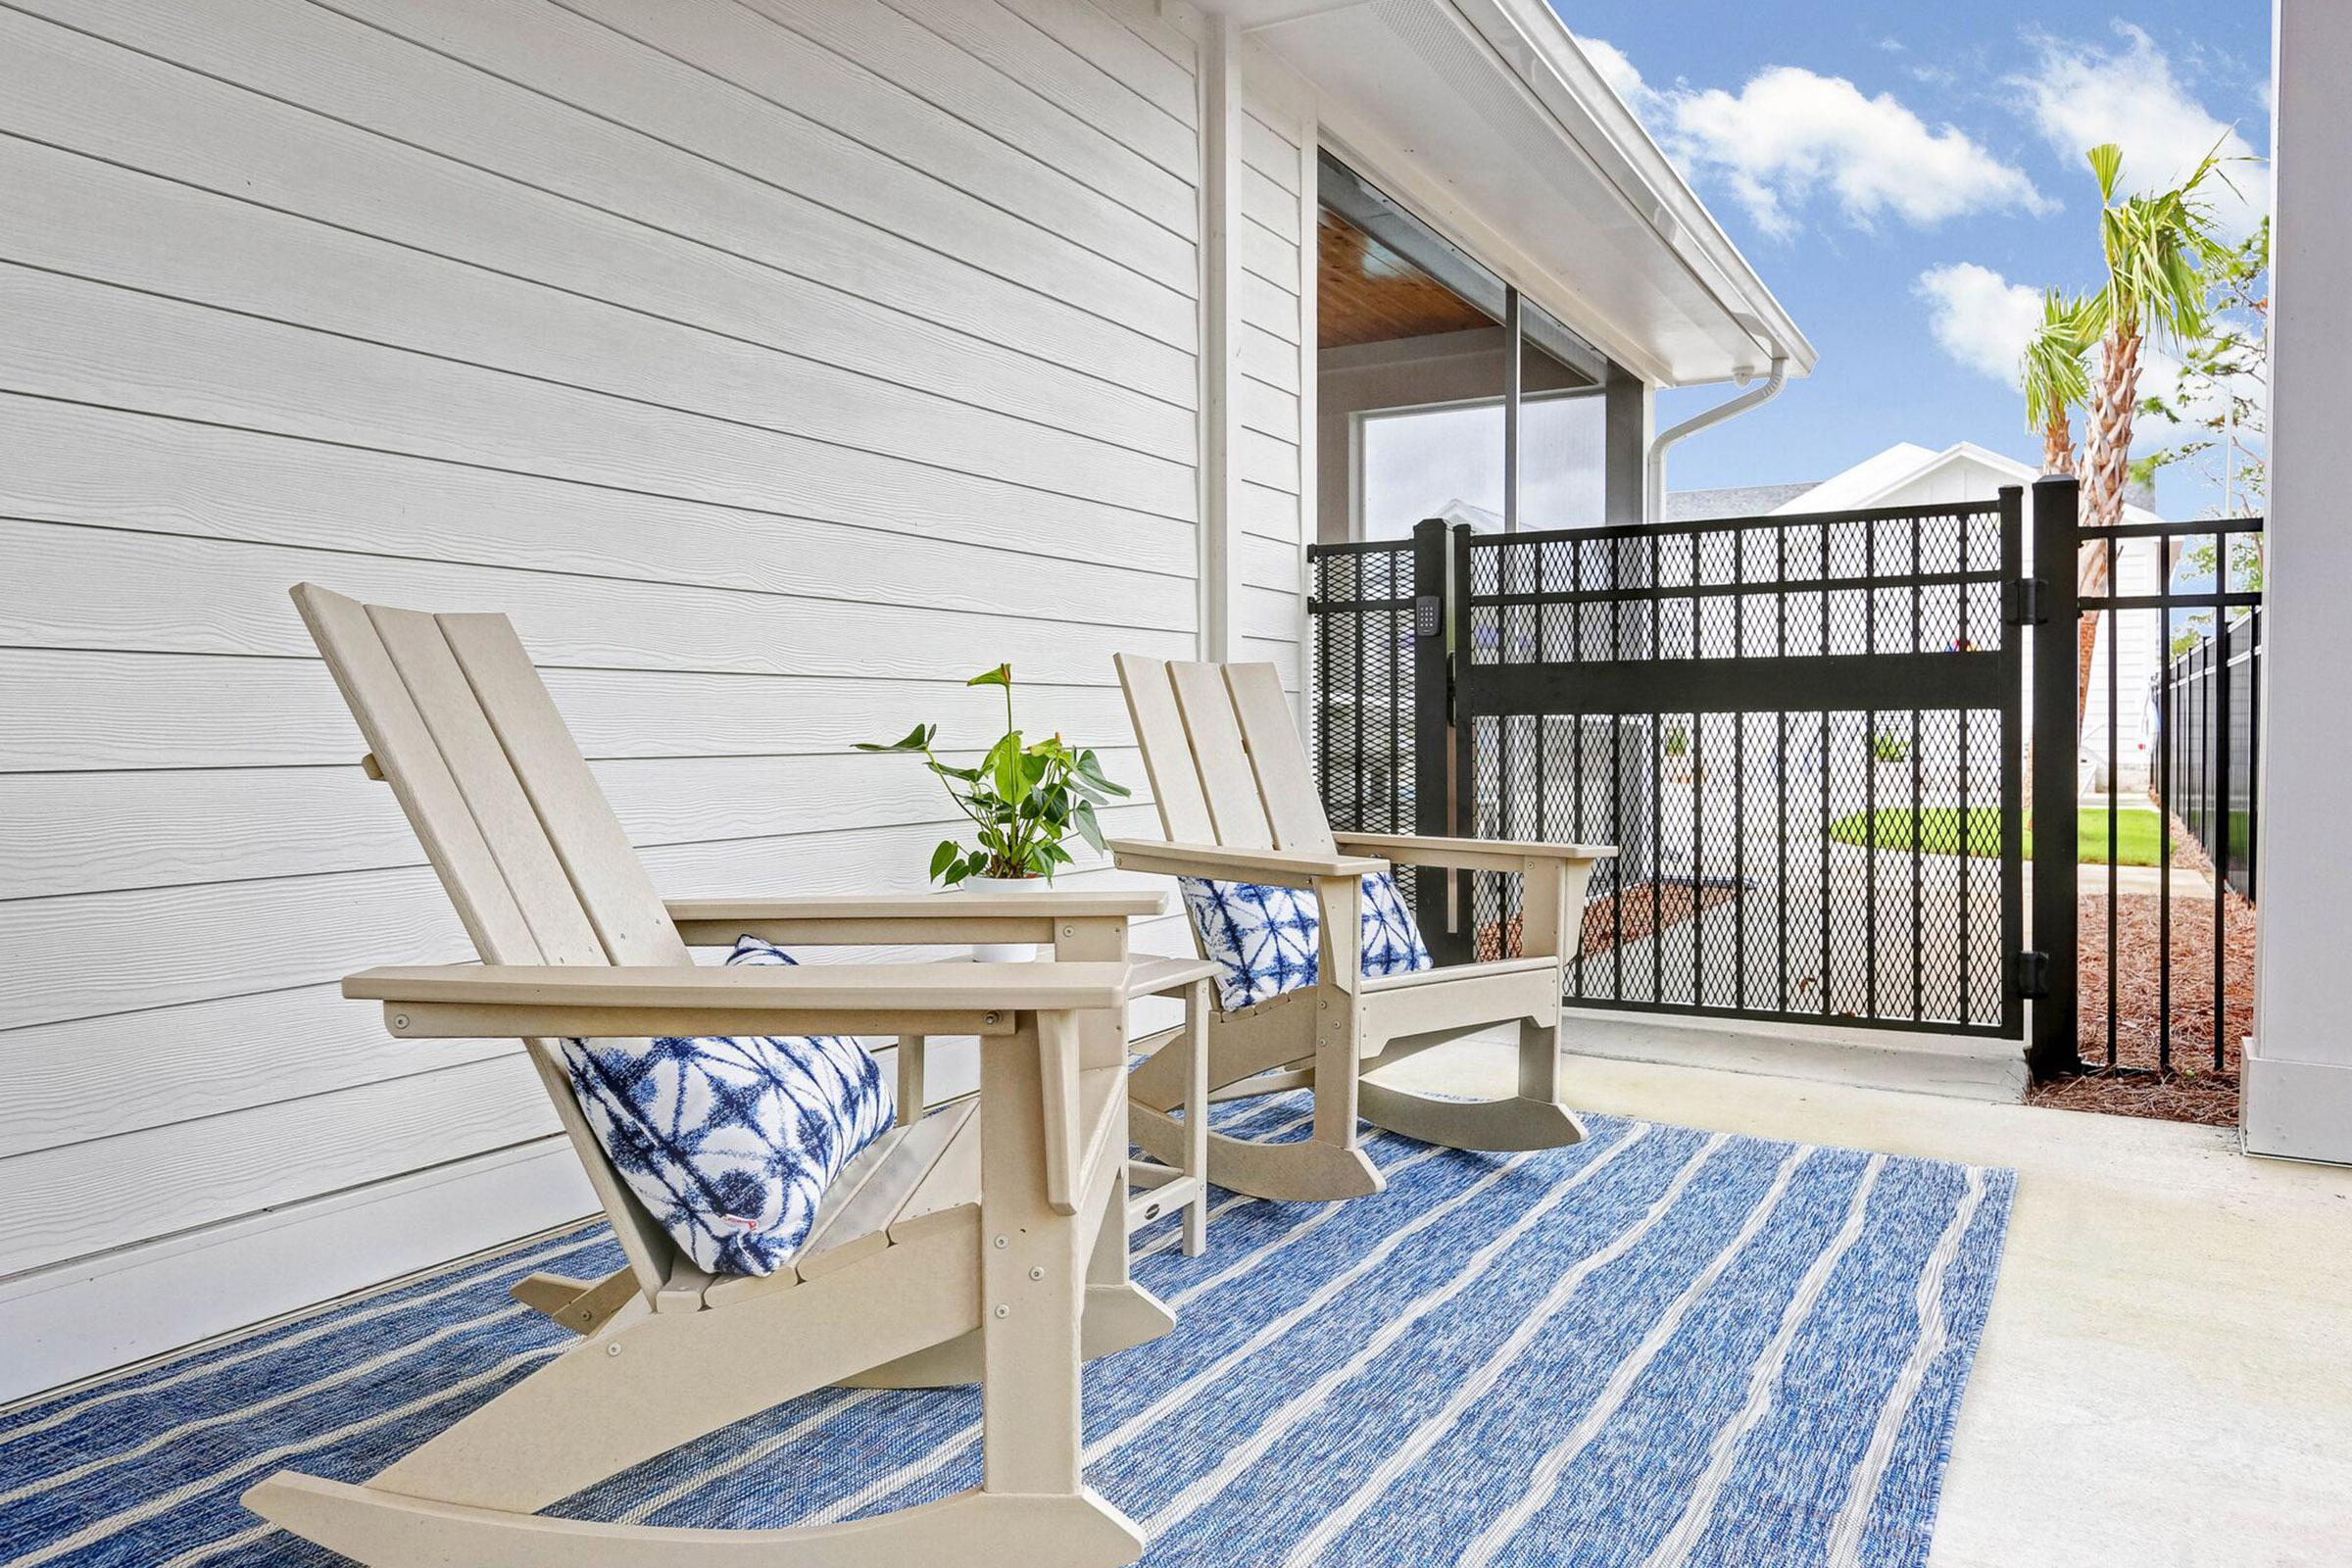 Fenced in patios at The Townhomes at Beau Rivage in Wilmington, North Carolina.